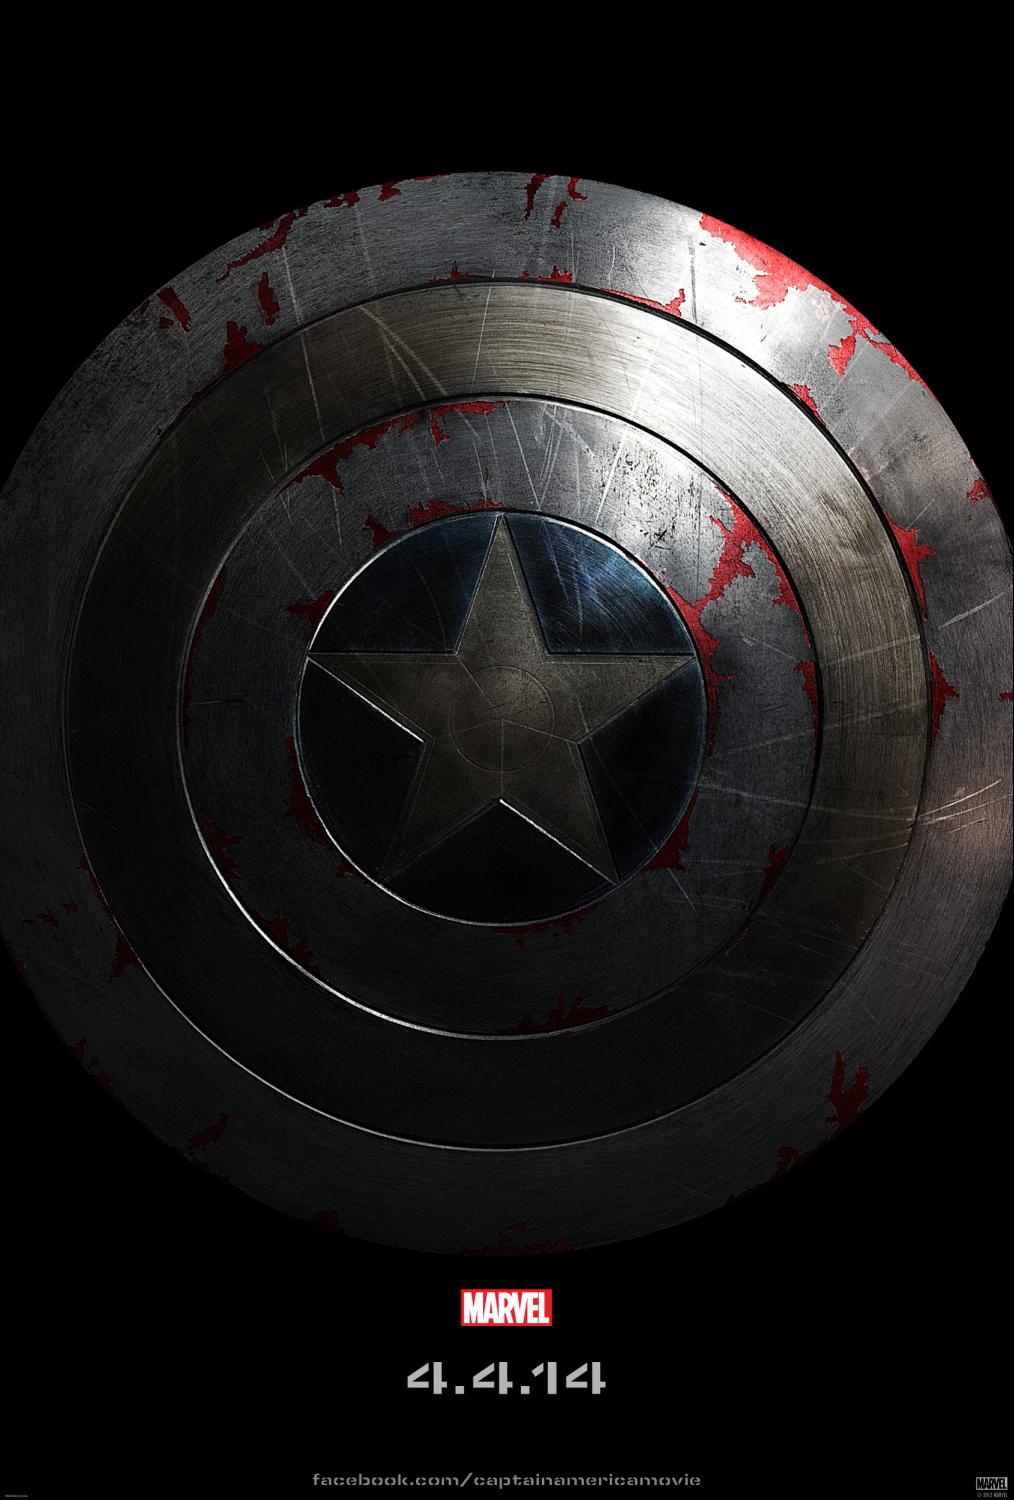 Captain America, The Winter Soldier Shield Movie Poster